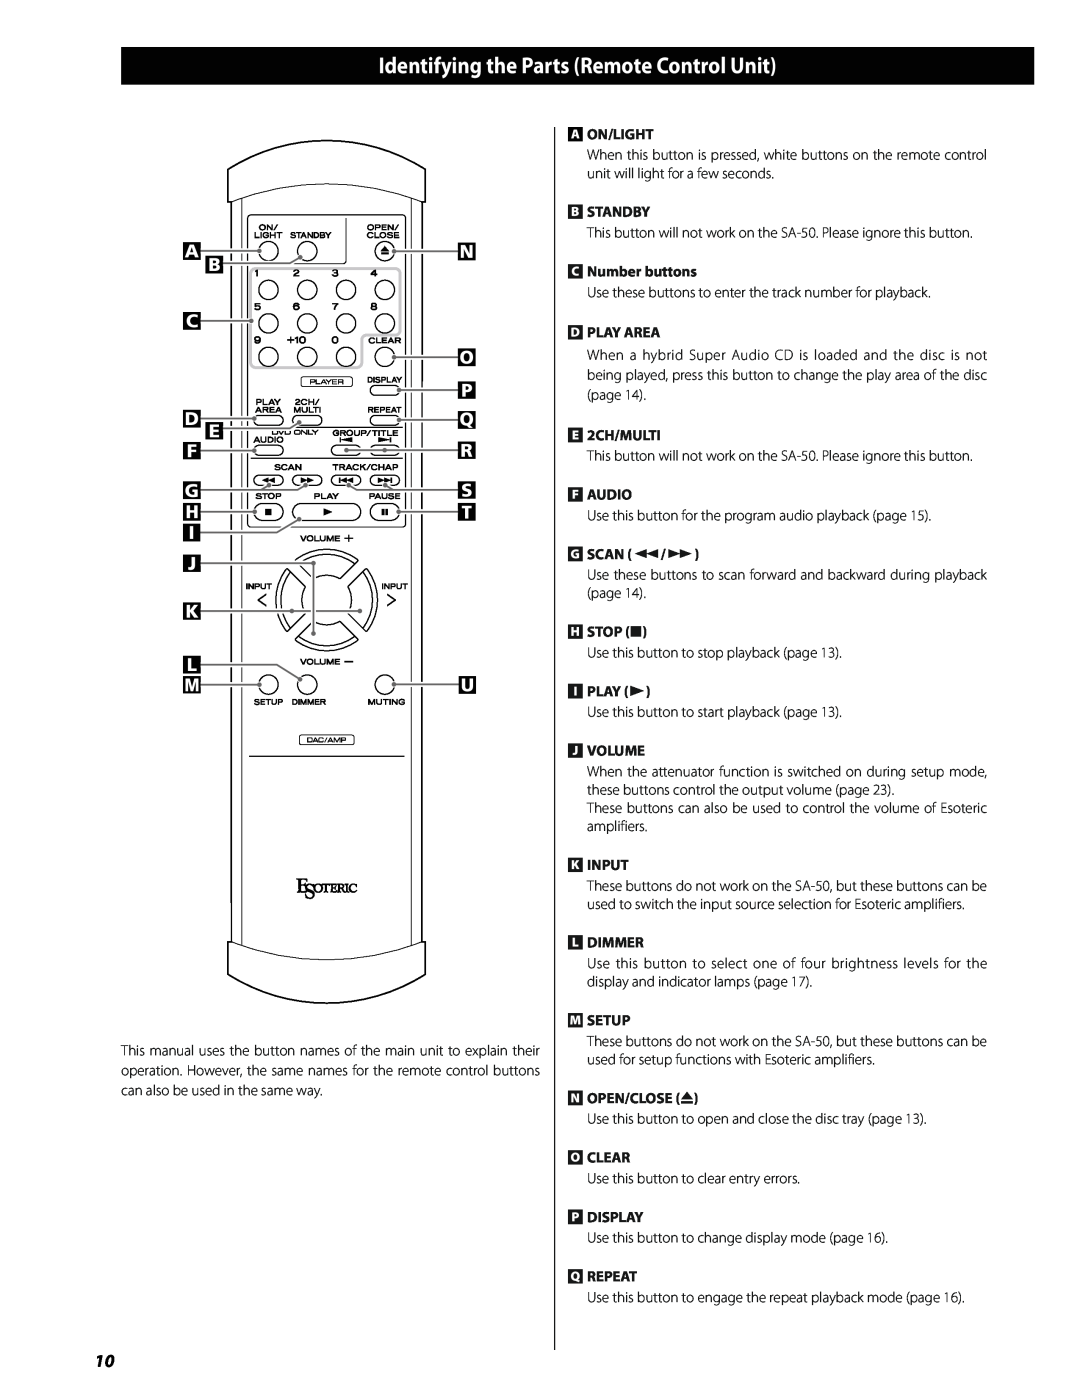 Esoteric SA-50 owner manual Identifying the Parts Remote Control Unit 